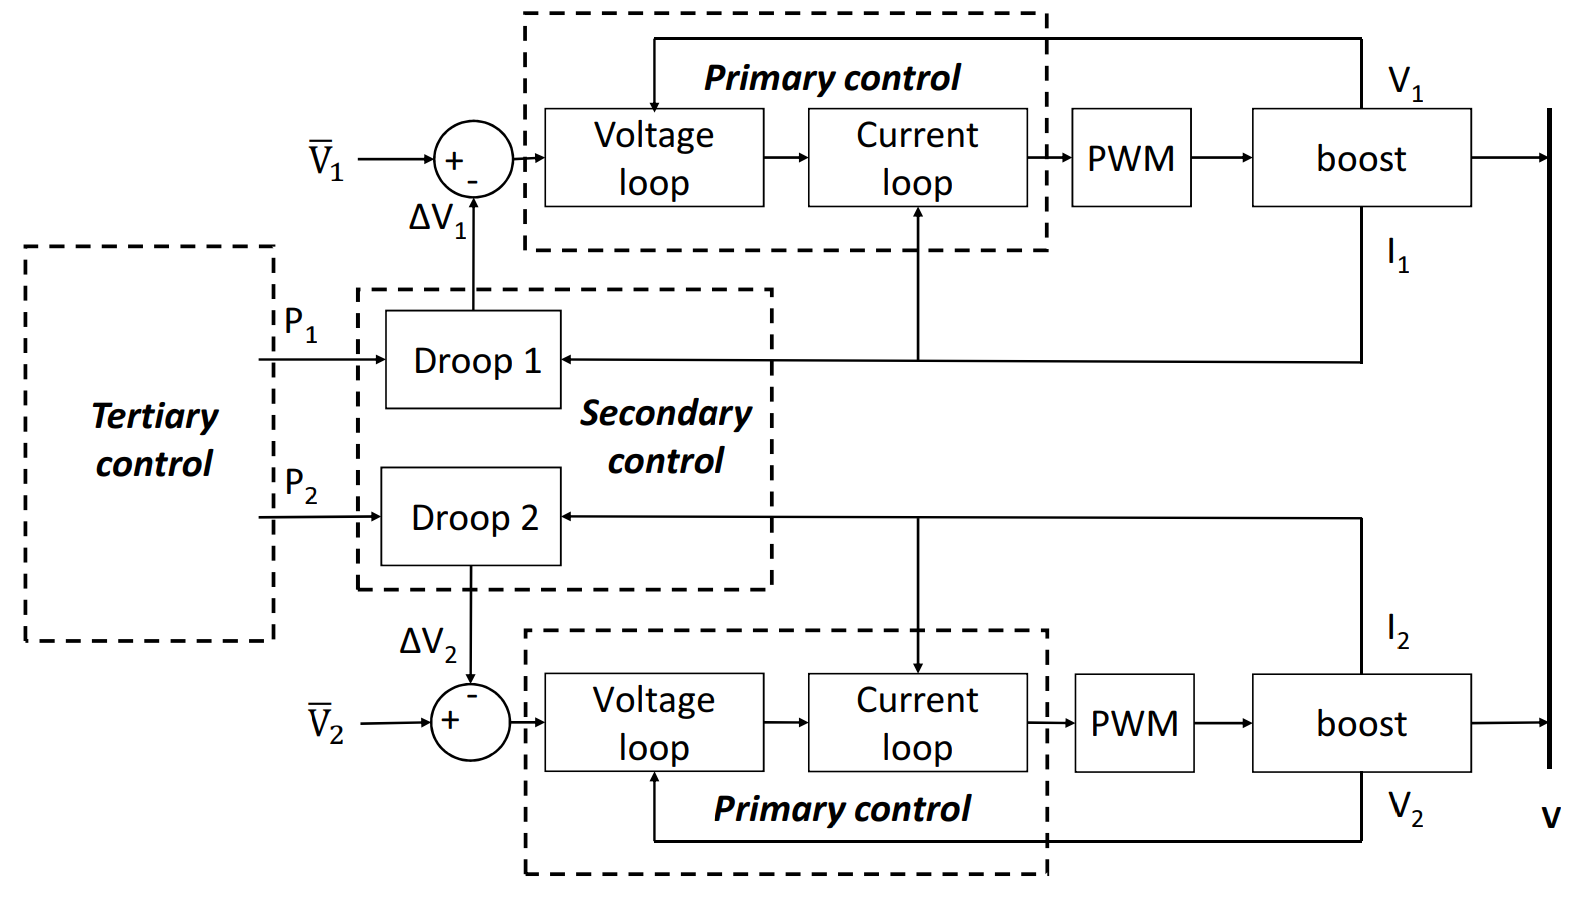 Hierarchical topology to control de DC microgrid